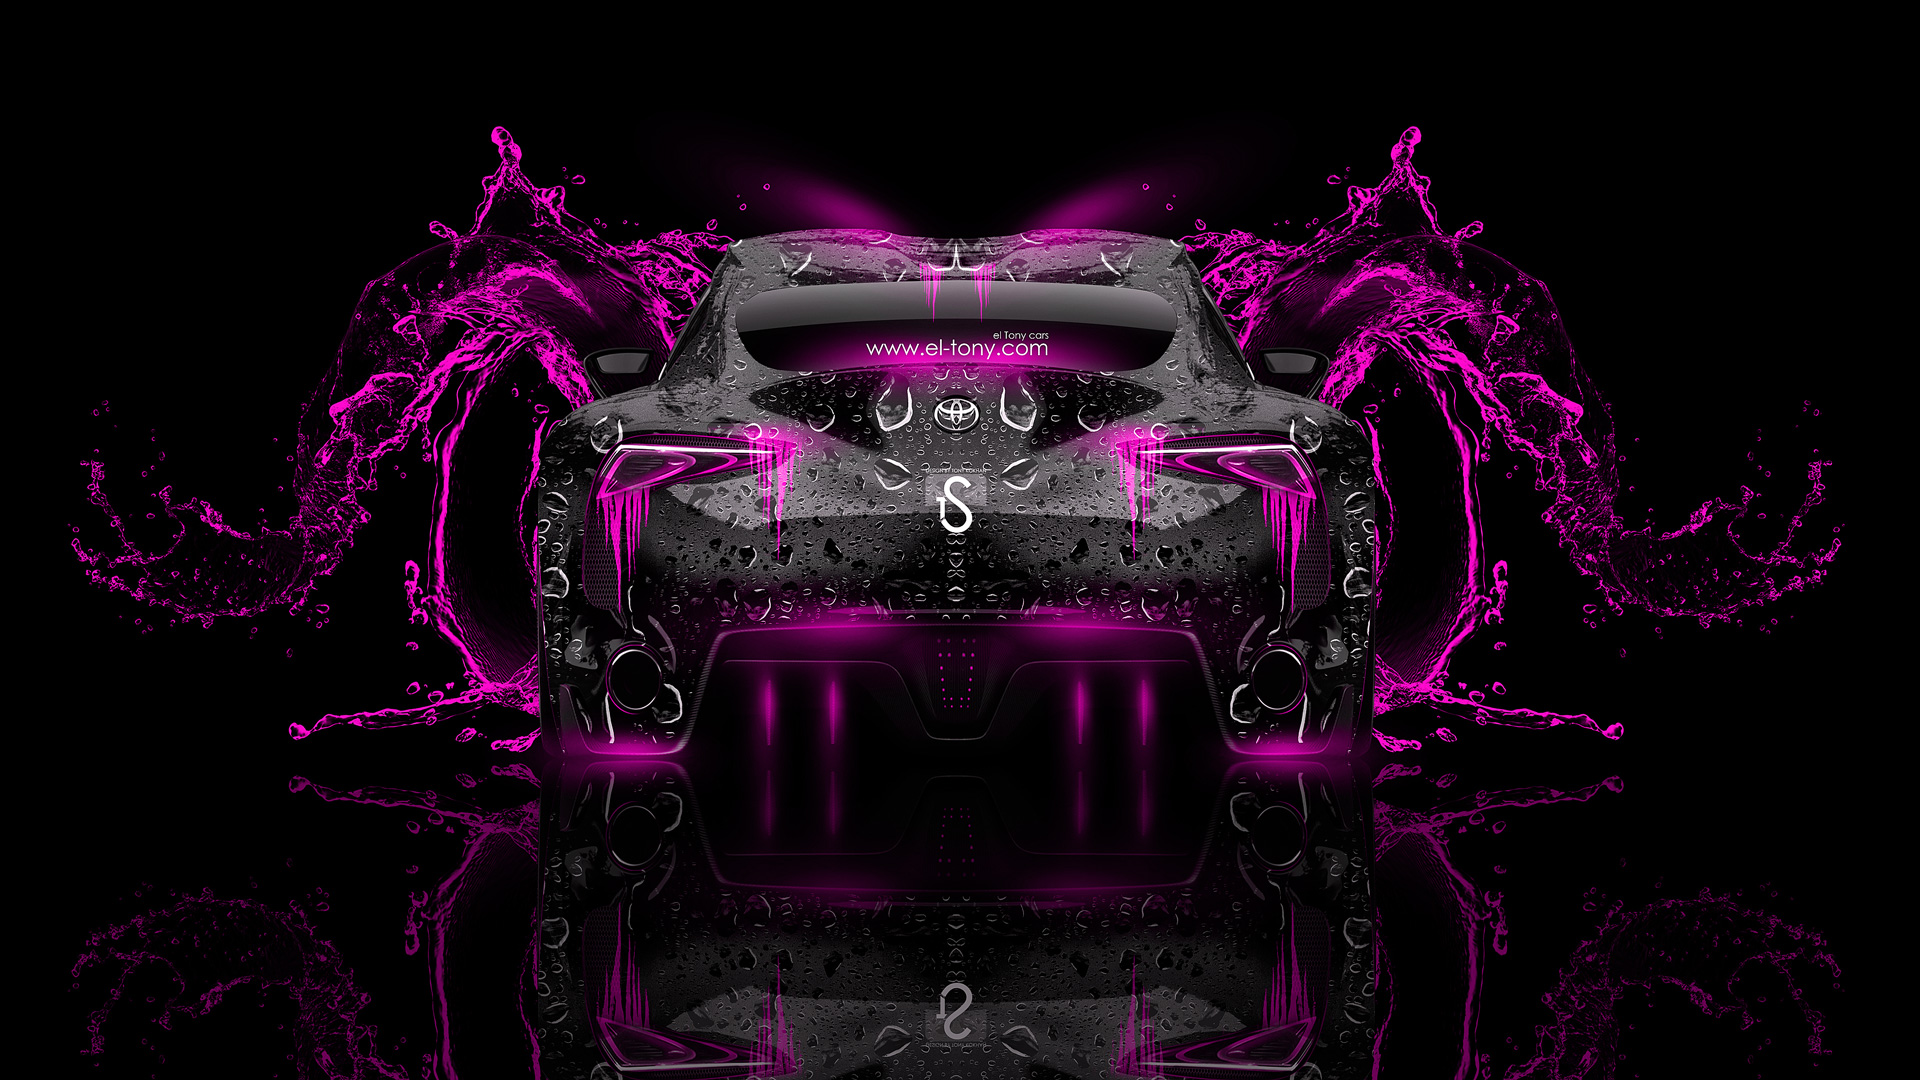 Toyota-FT-1-Back-Pink-Neon-Water-Abstract-Car-2014-design-by-Tony-Kokhan-www.el-tony.com_.jpg